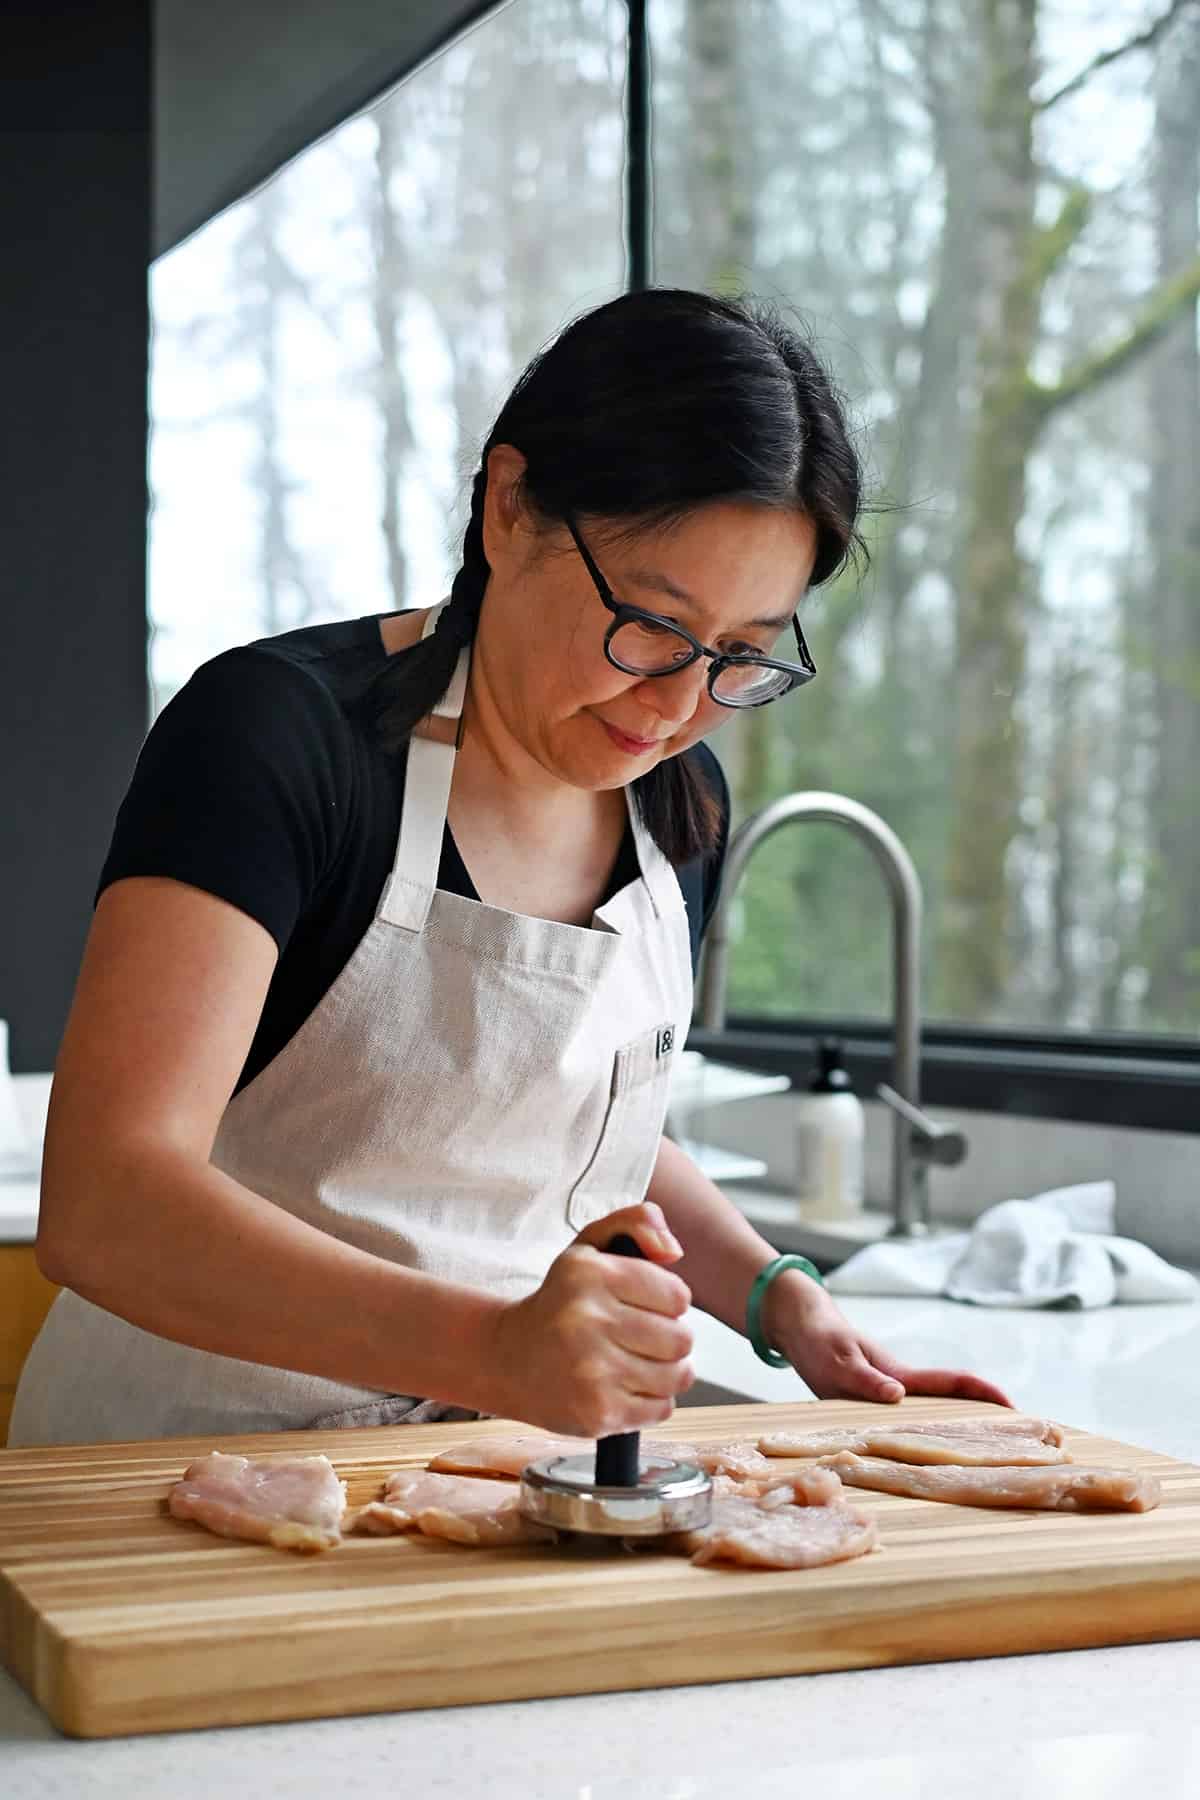 An Asian woman is using a meat pounder to flatten some raw chicken cutlets on a wooden cutting board before making pesto chicken.